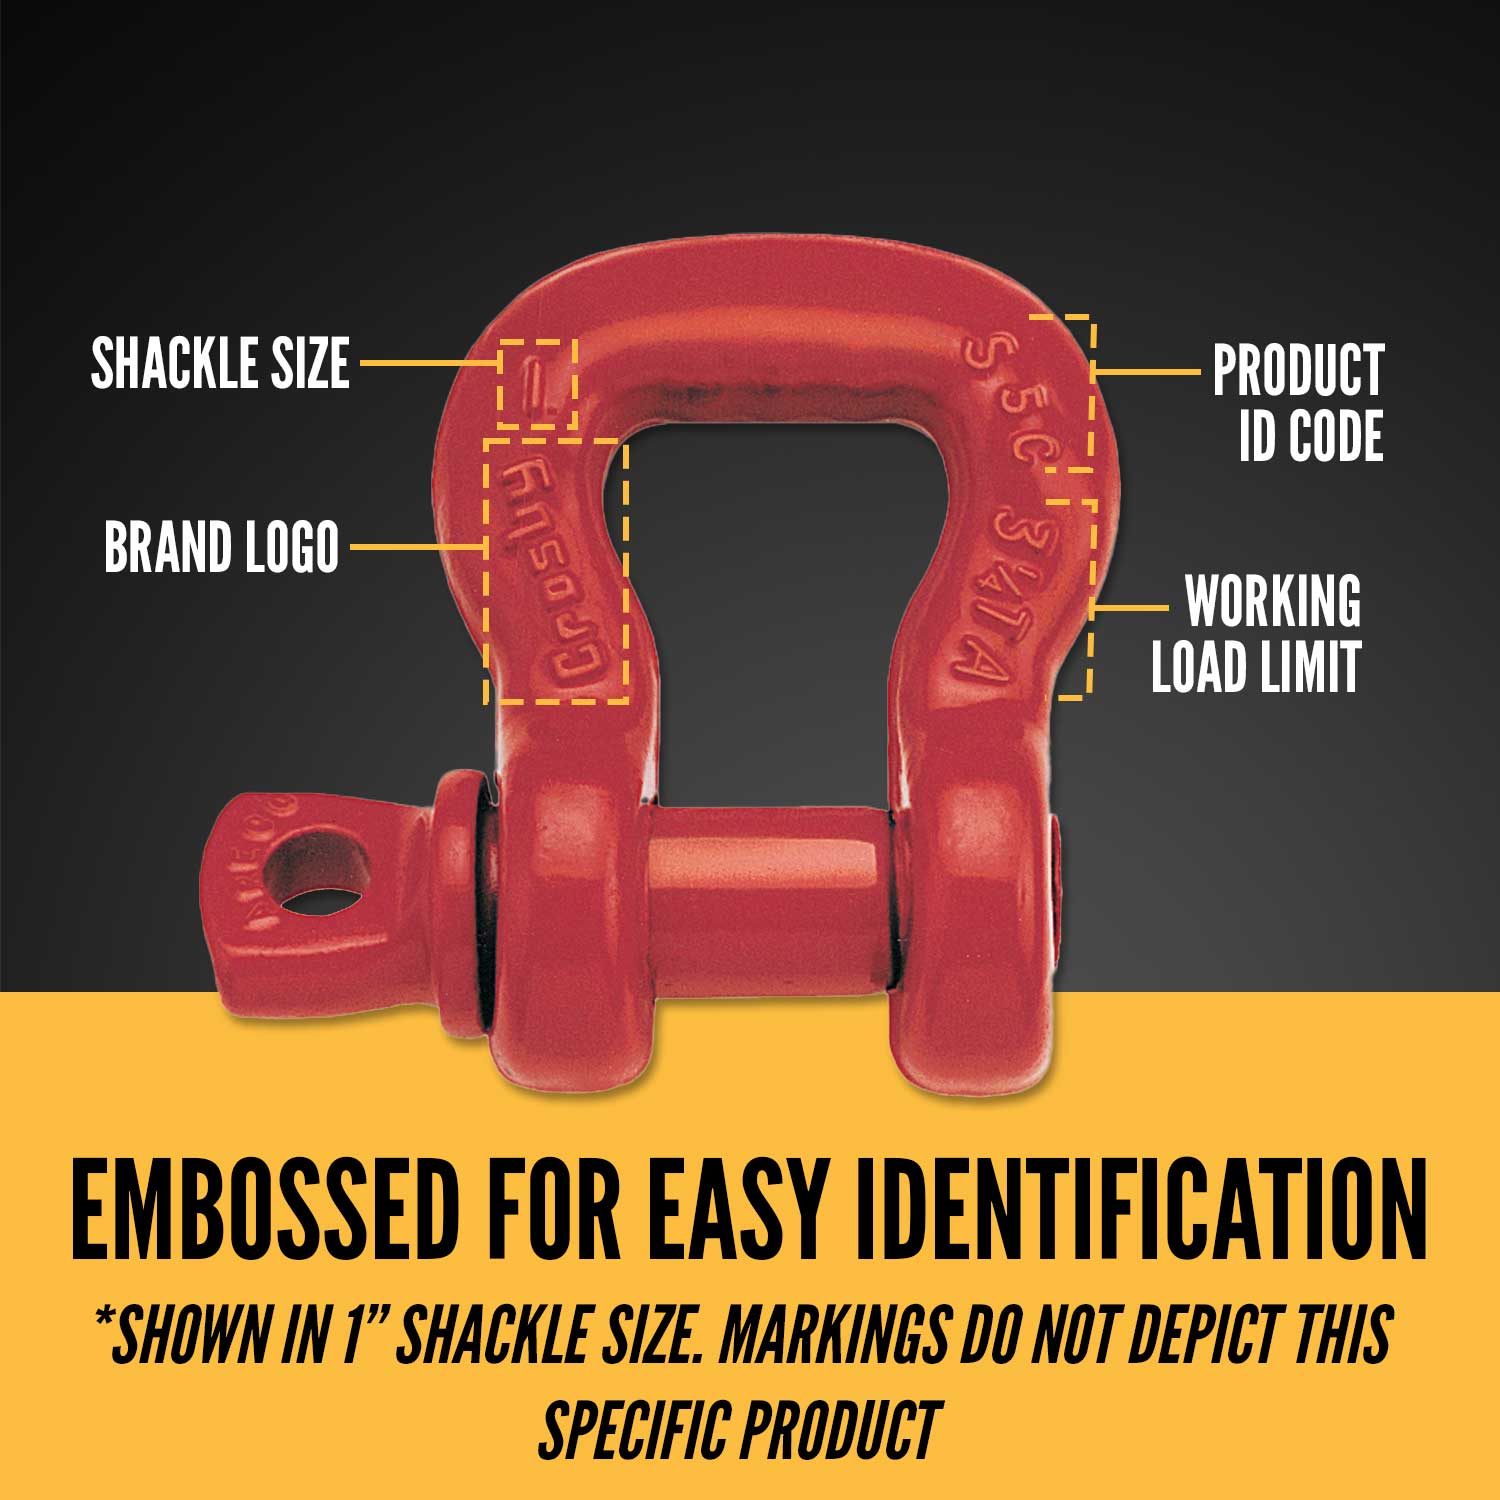 Crosby® Screw Pin Sling Saver Shackle | S-253 - 5"- 35 Ton embossed for easy identification